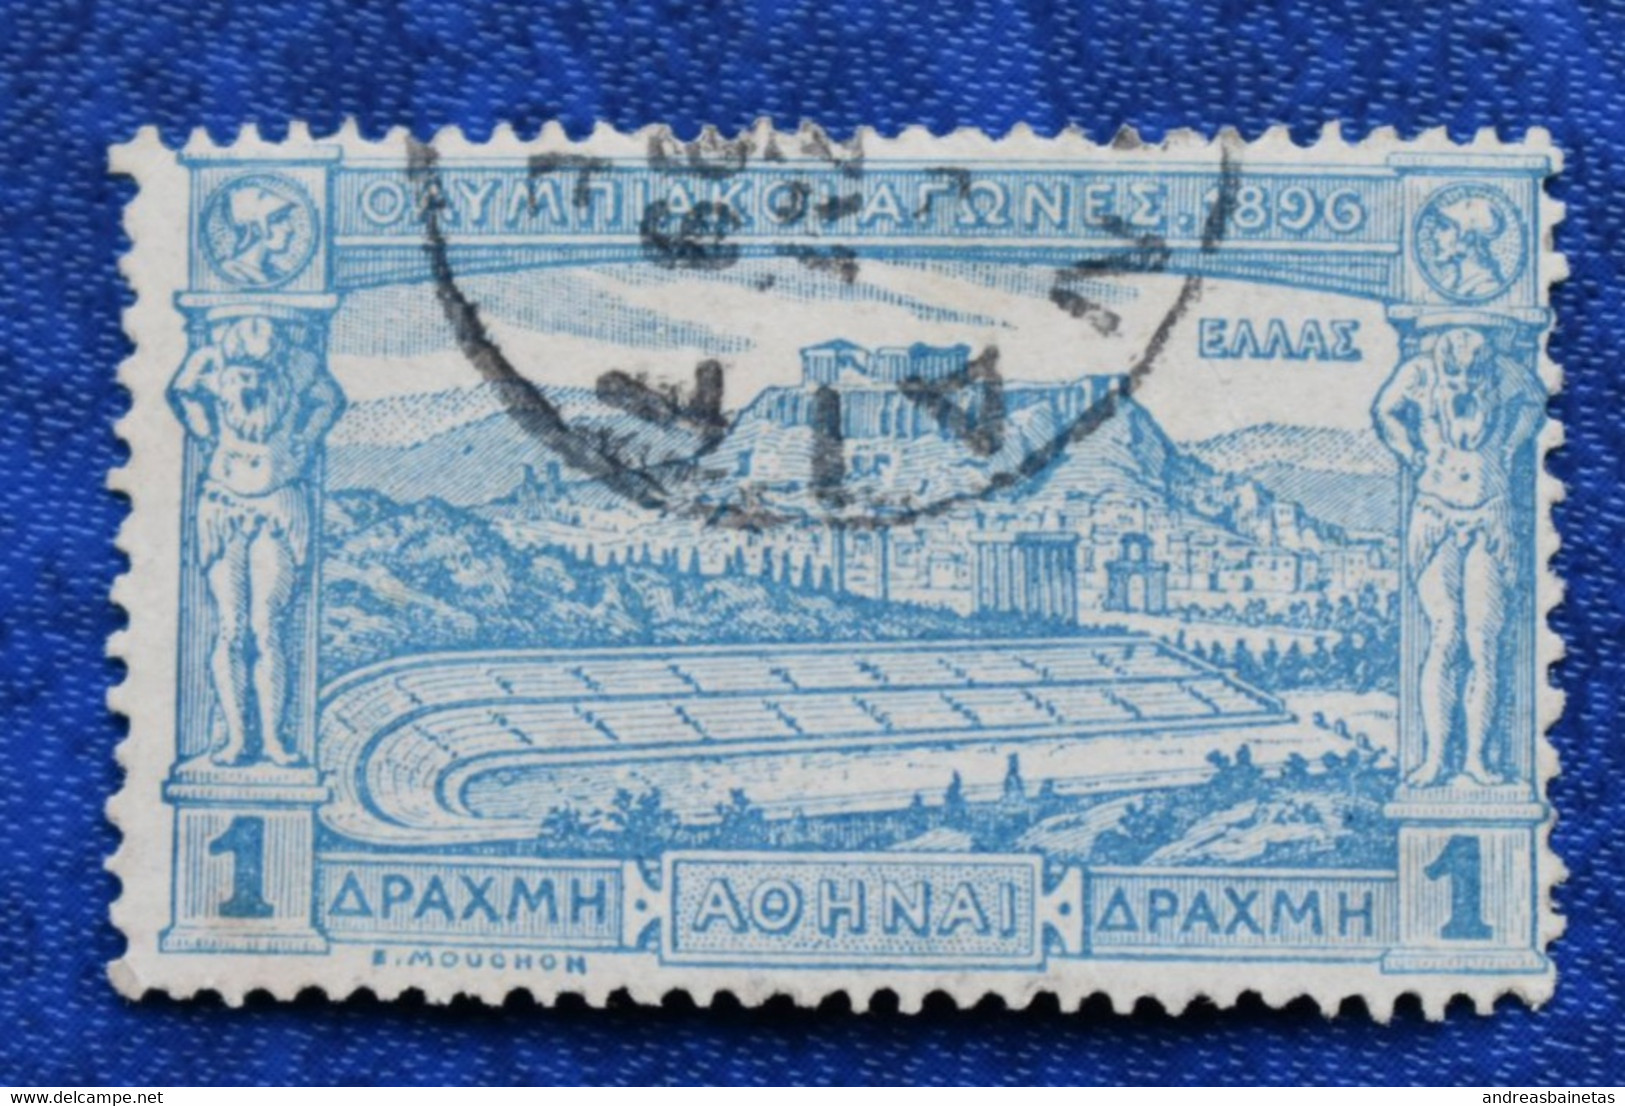 Stamps GREECE 1896 The 1st Modern Olympic Games 1 ₯ - Greek Drachma Used - Used Stamps